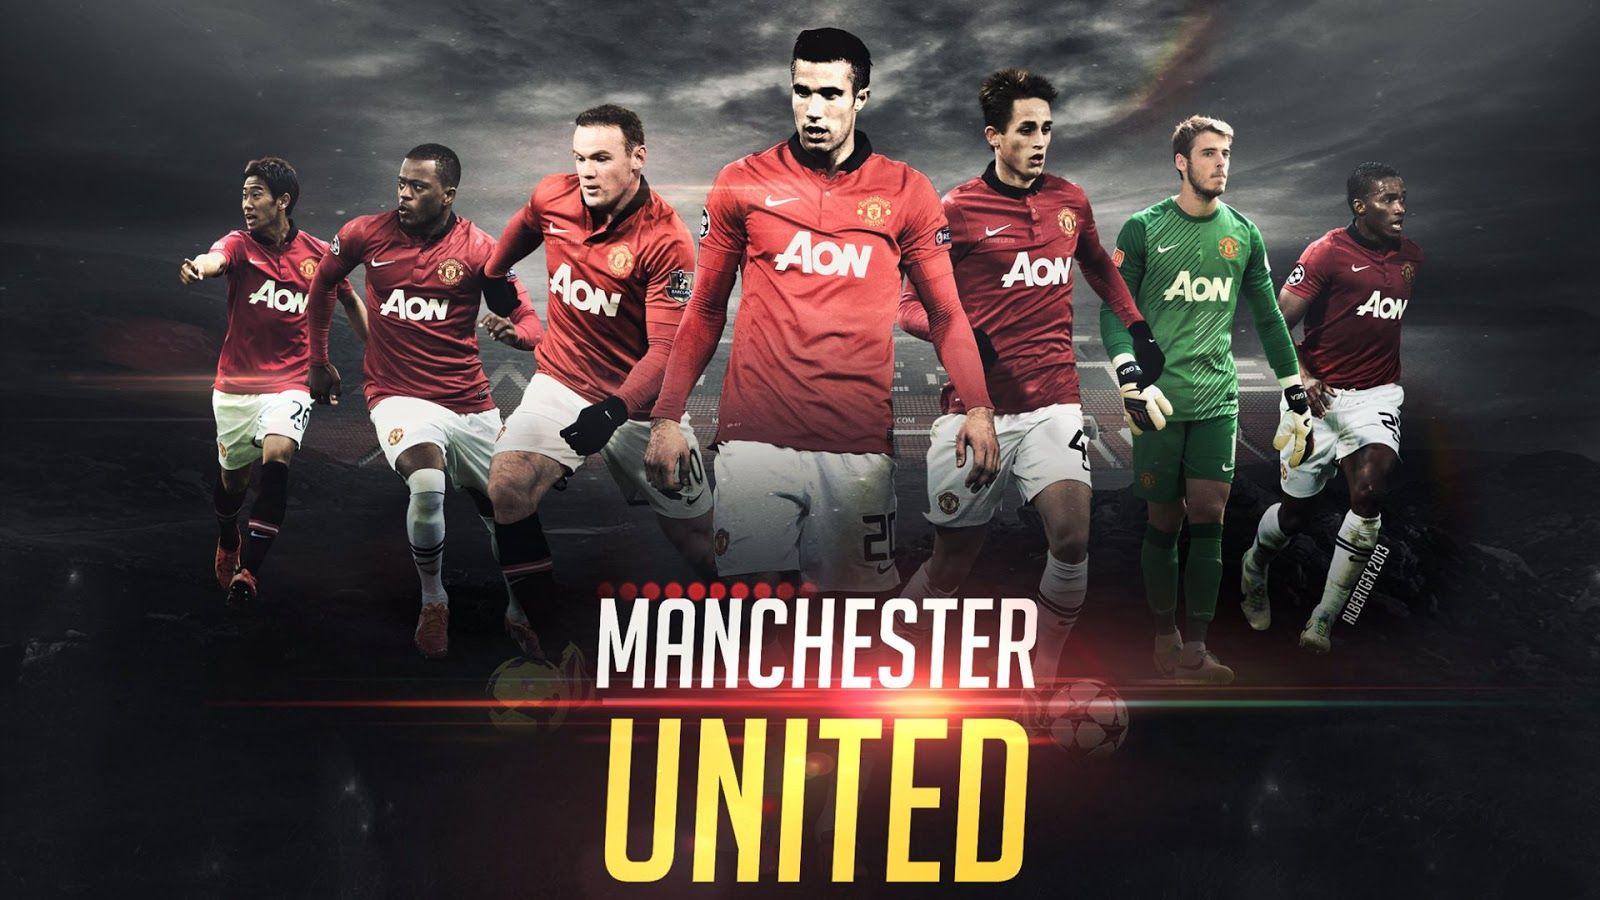 Manchester United Football Club Group Latest HD Wallpaper 2015